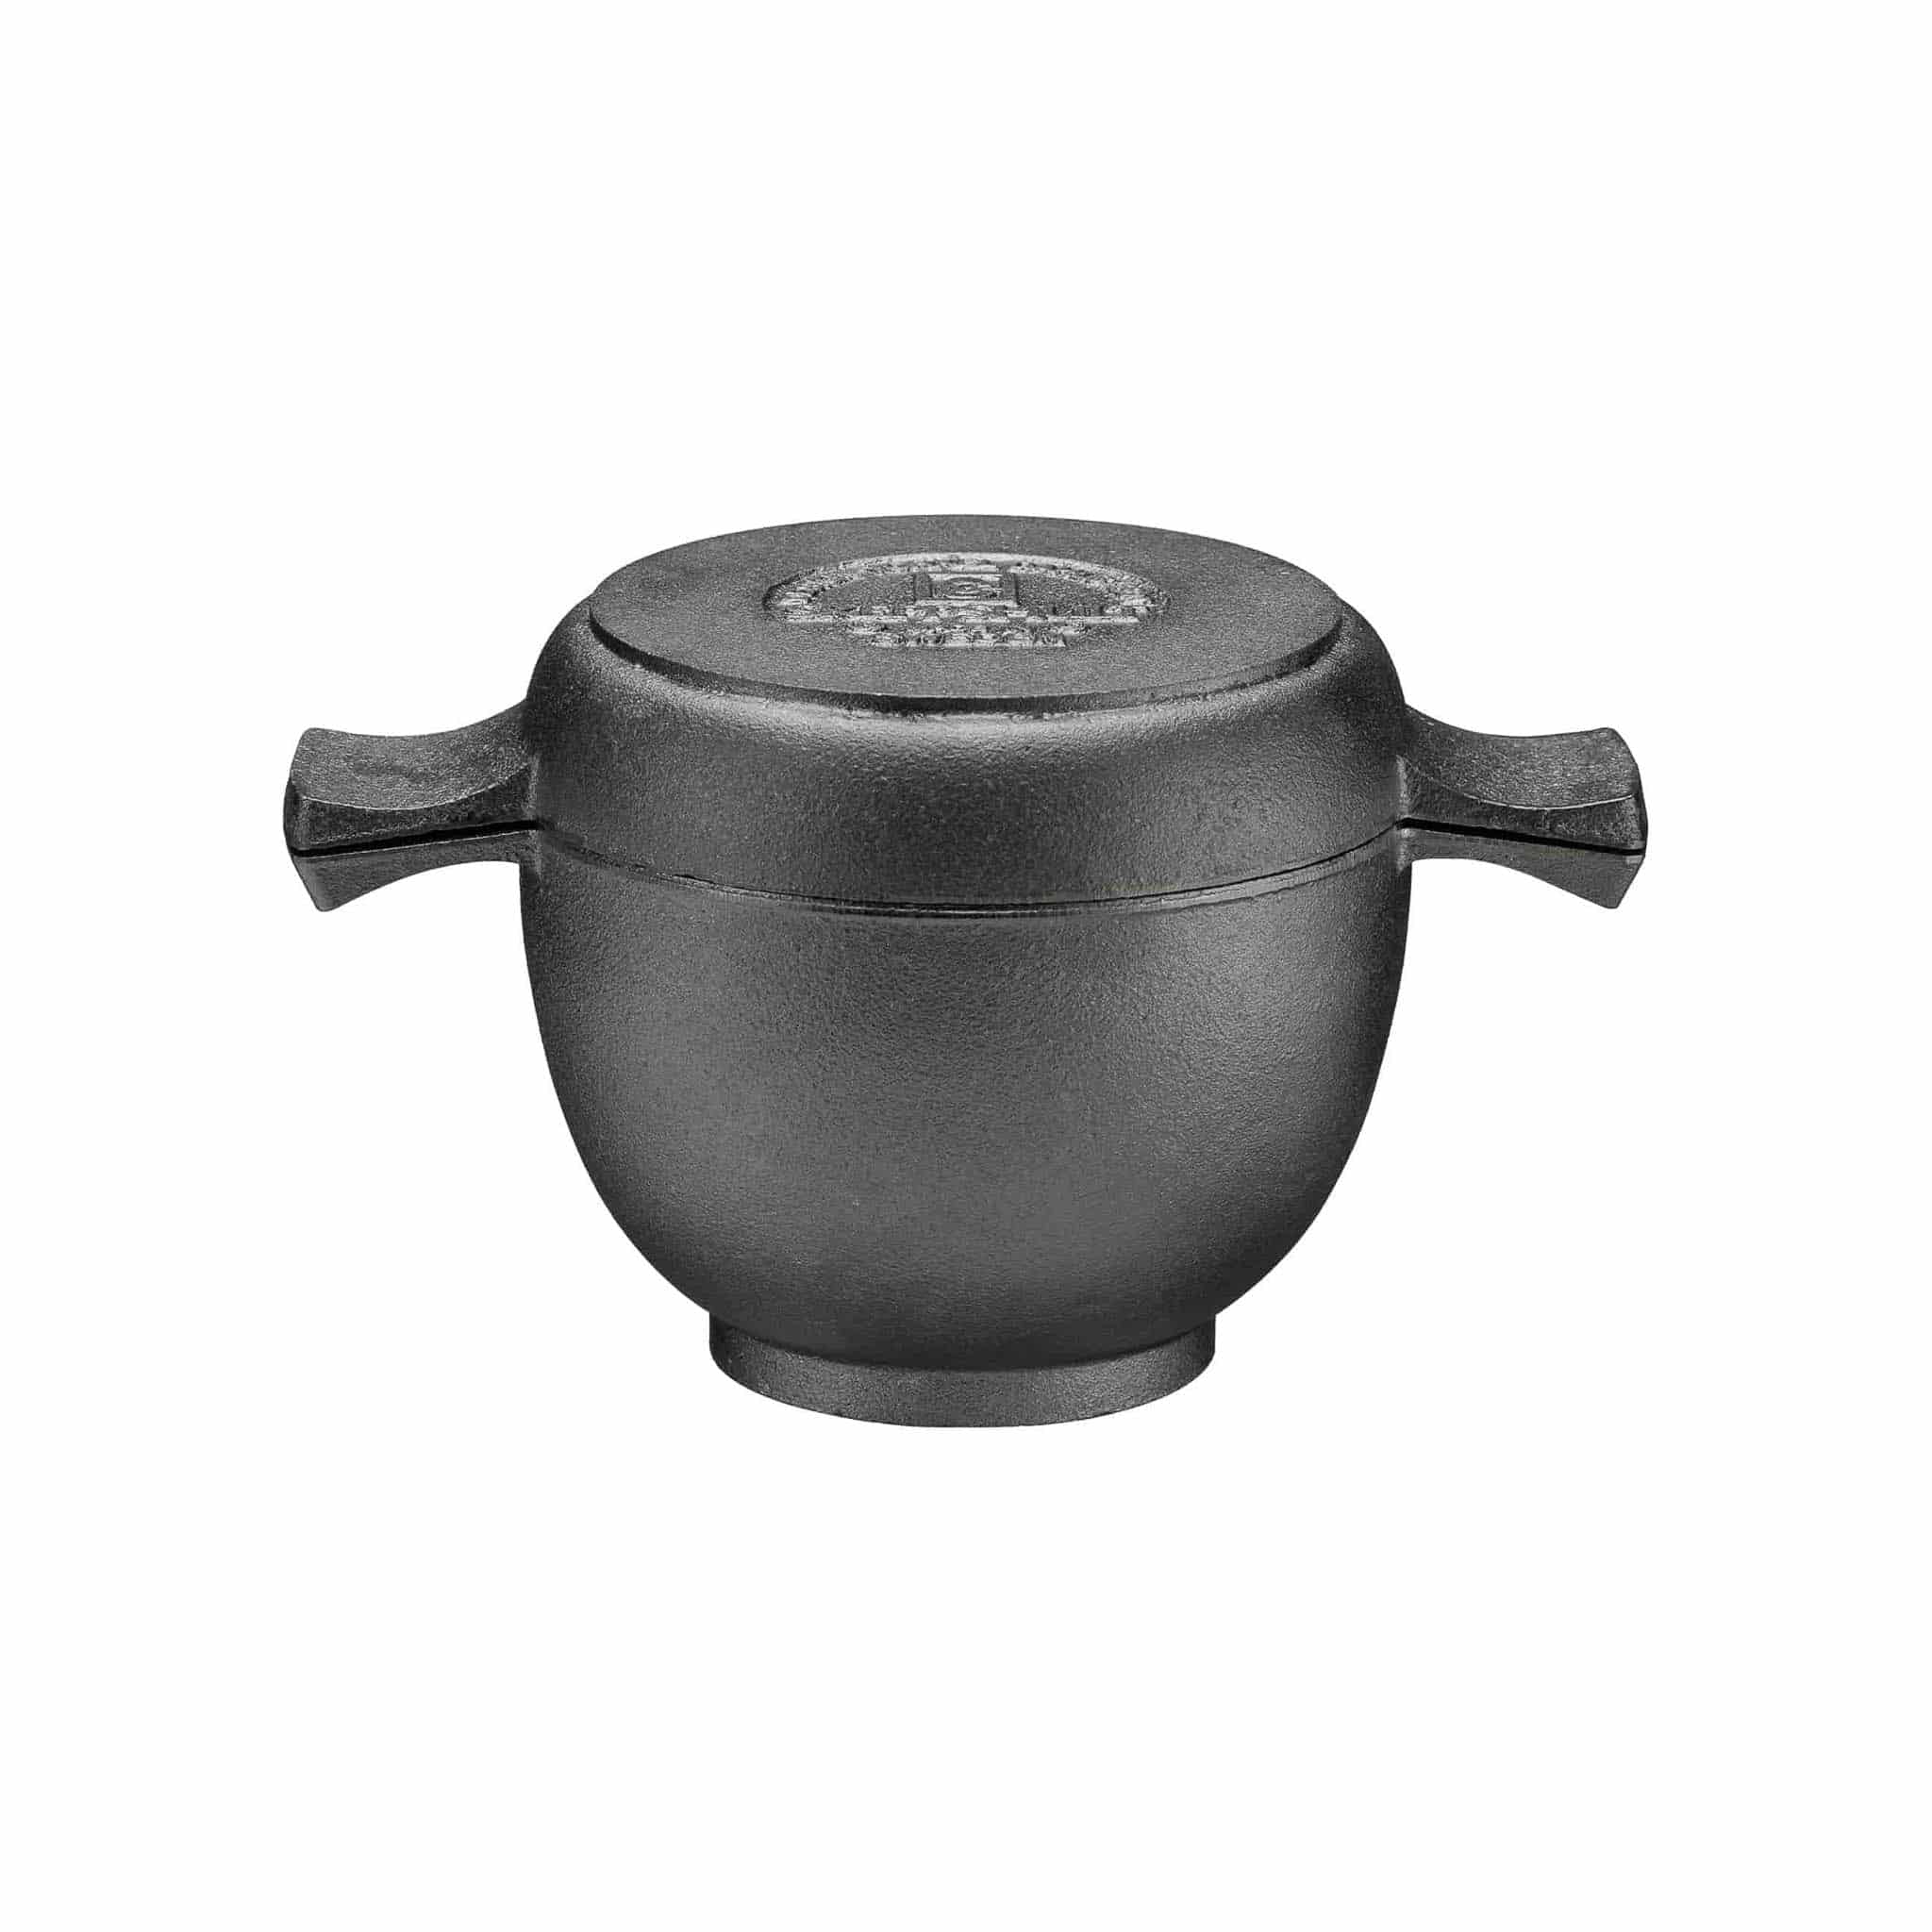 Product Review - Skeppshult Cast Iron Casserole from Pleasant Hill